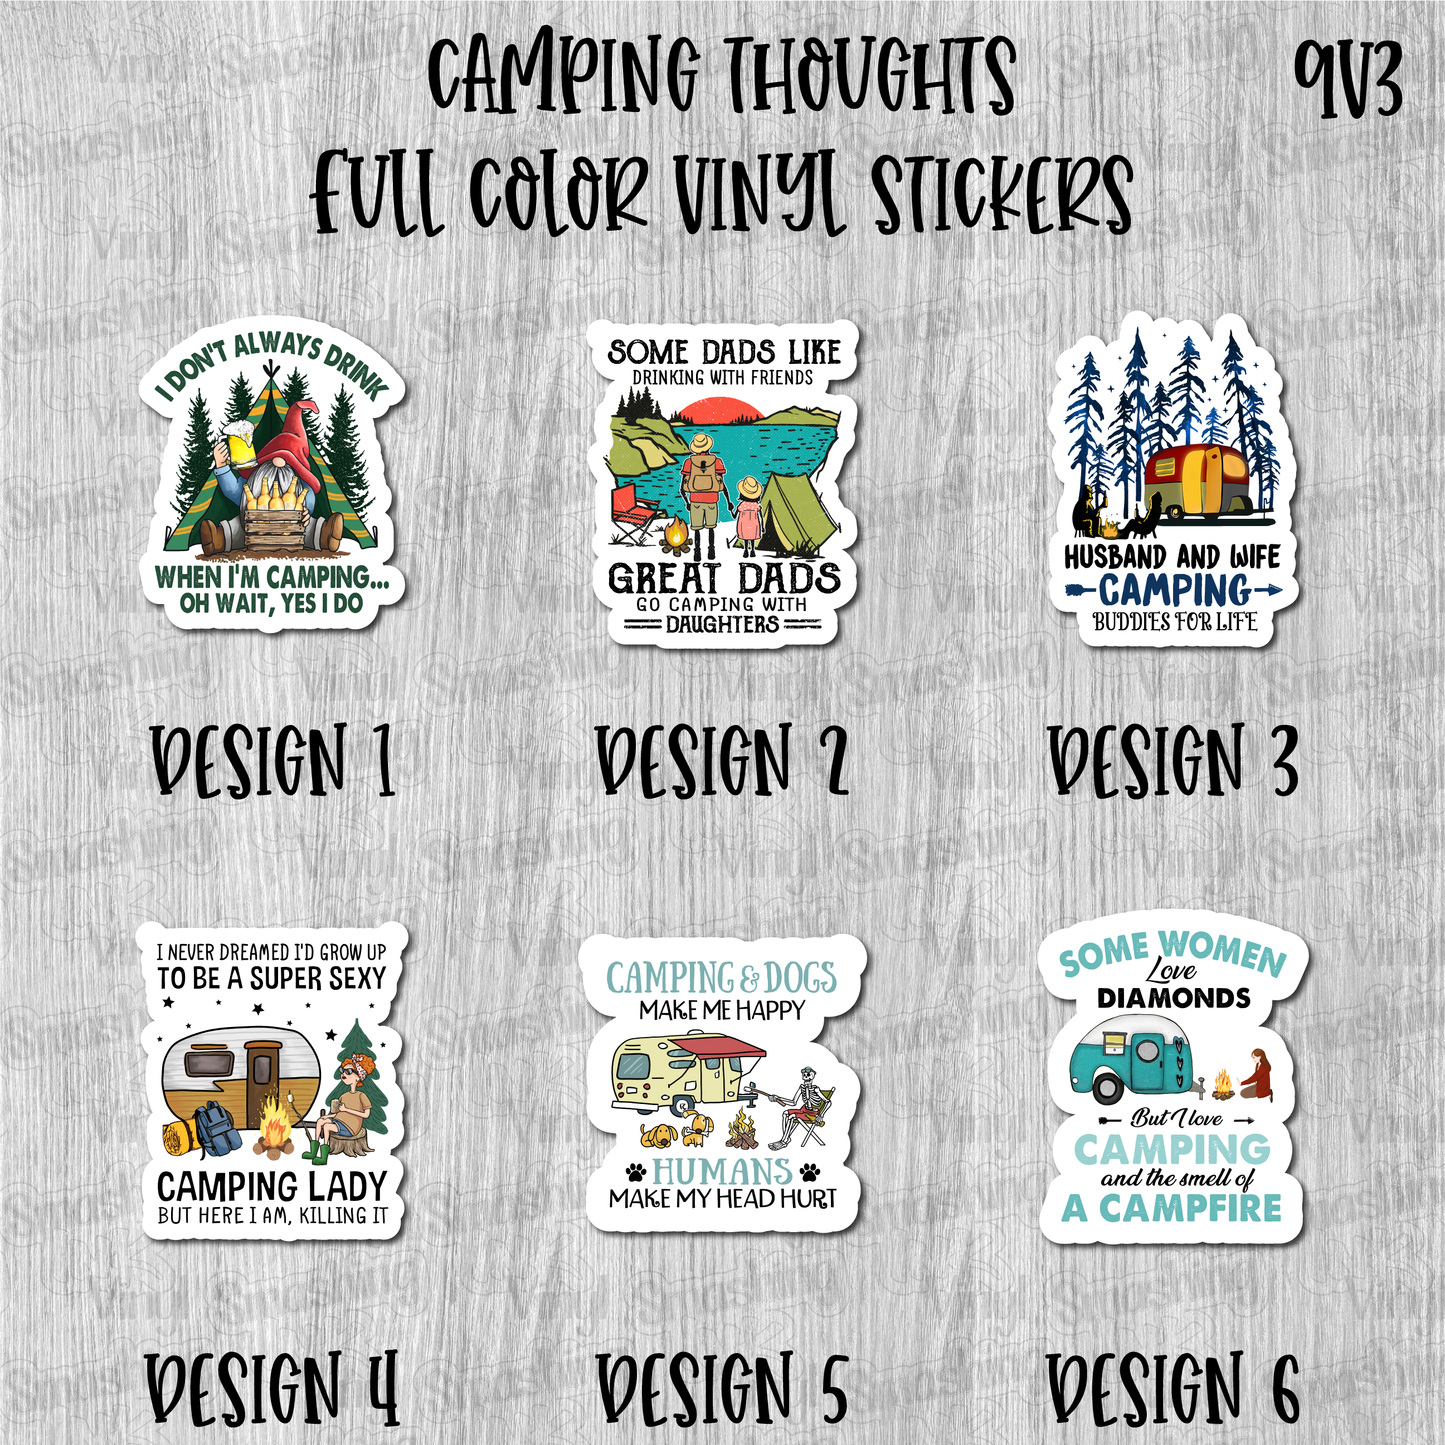 Camping Thoughts - Full Color Vinyl Stickers (SHIPS IN 3-7 BUS DAYS)